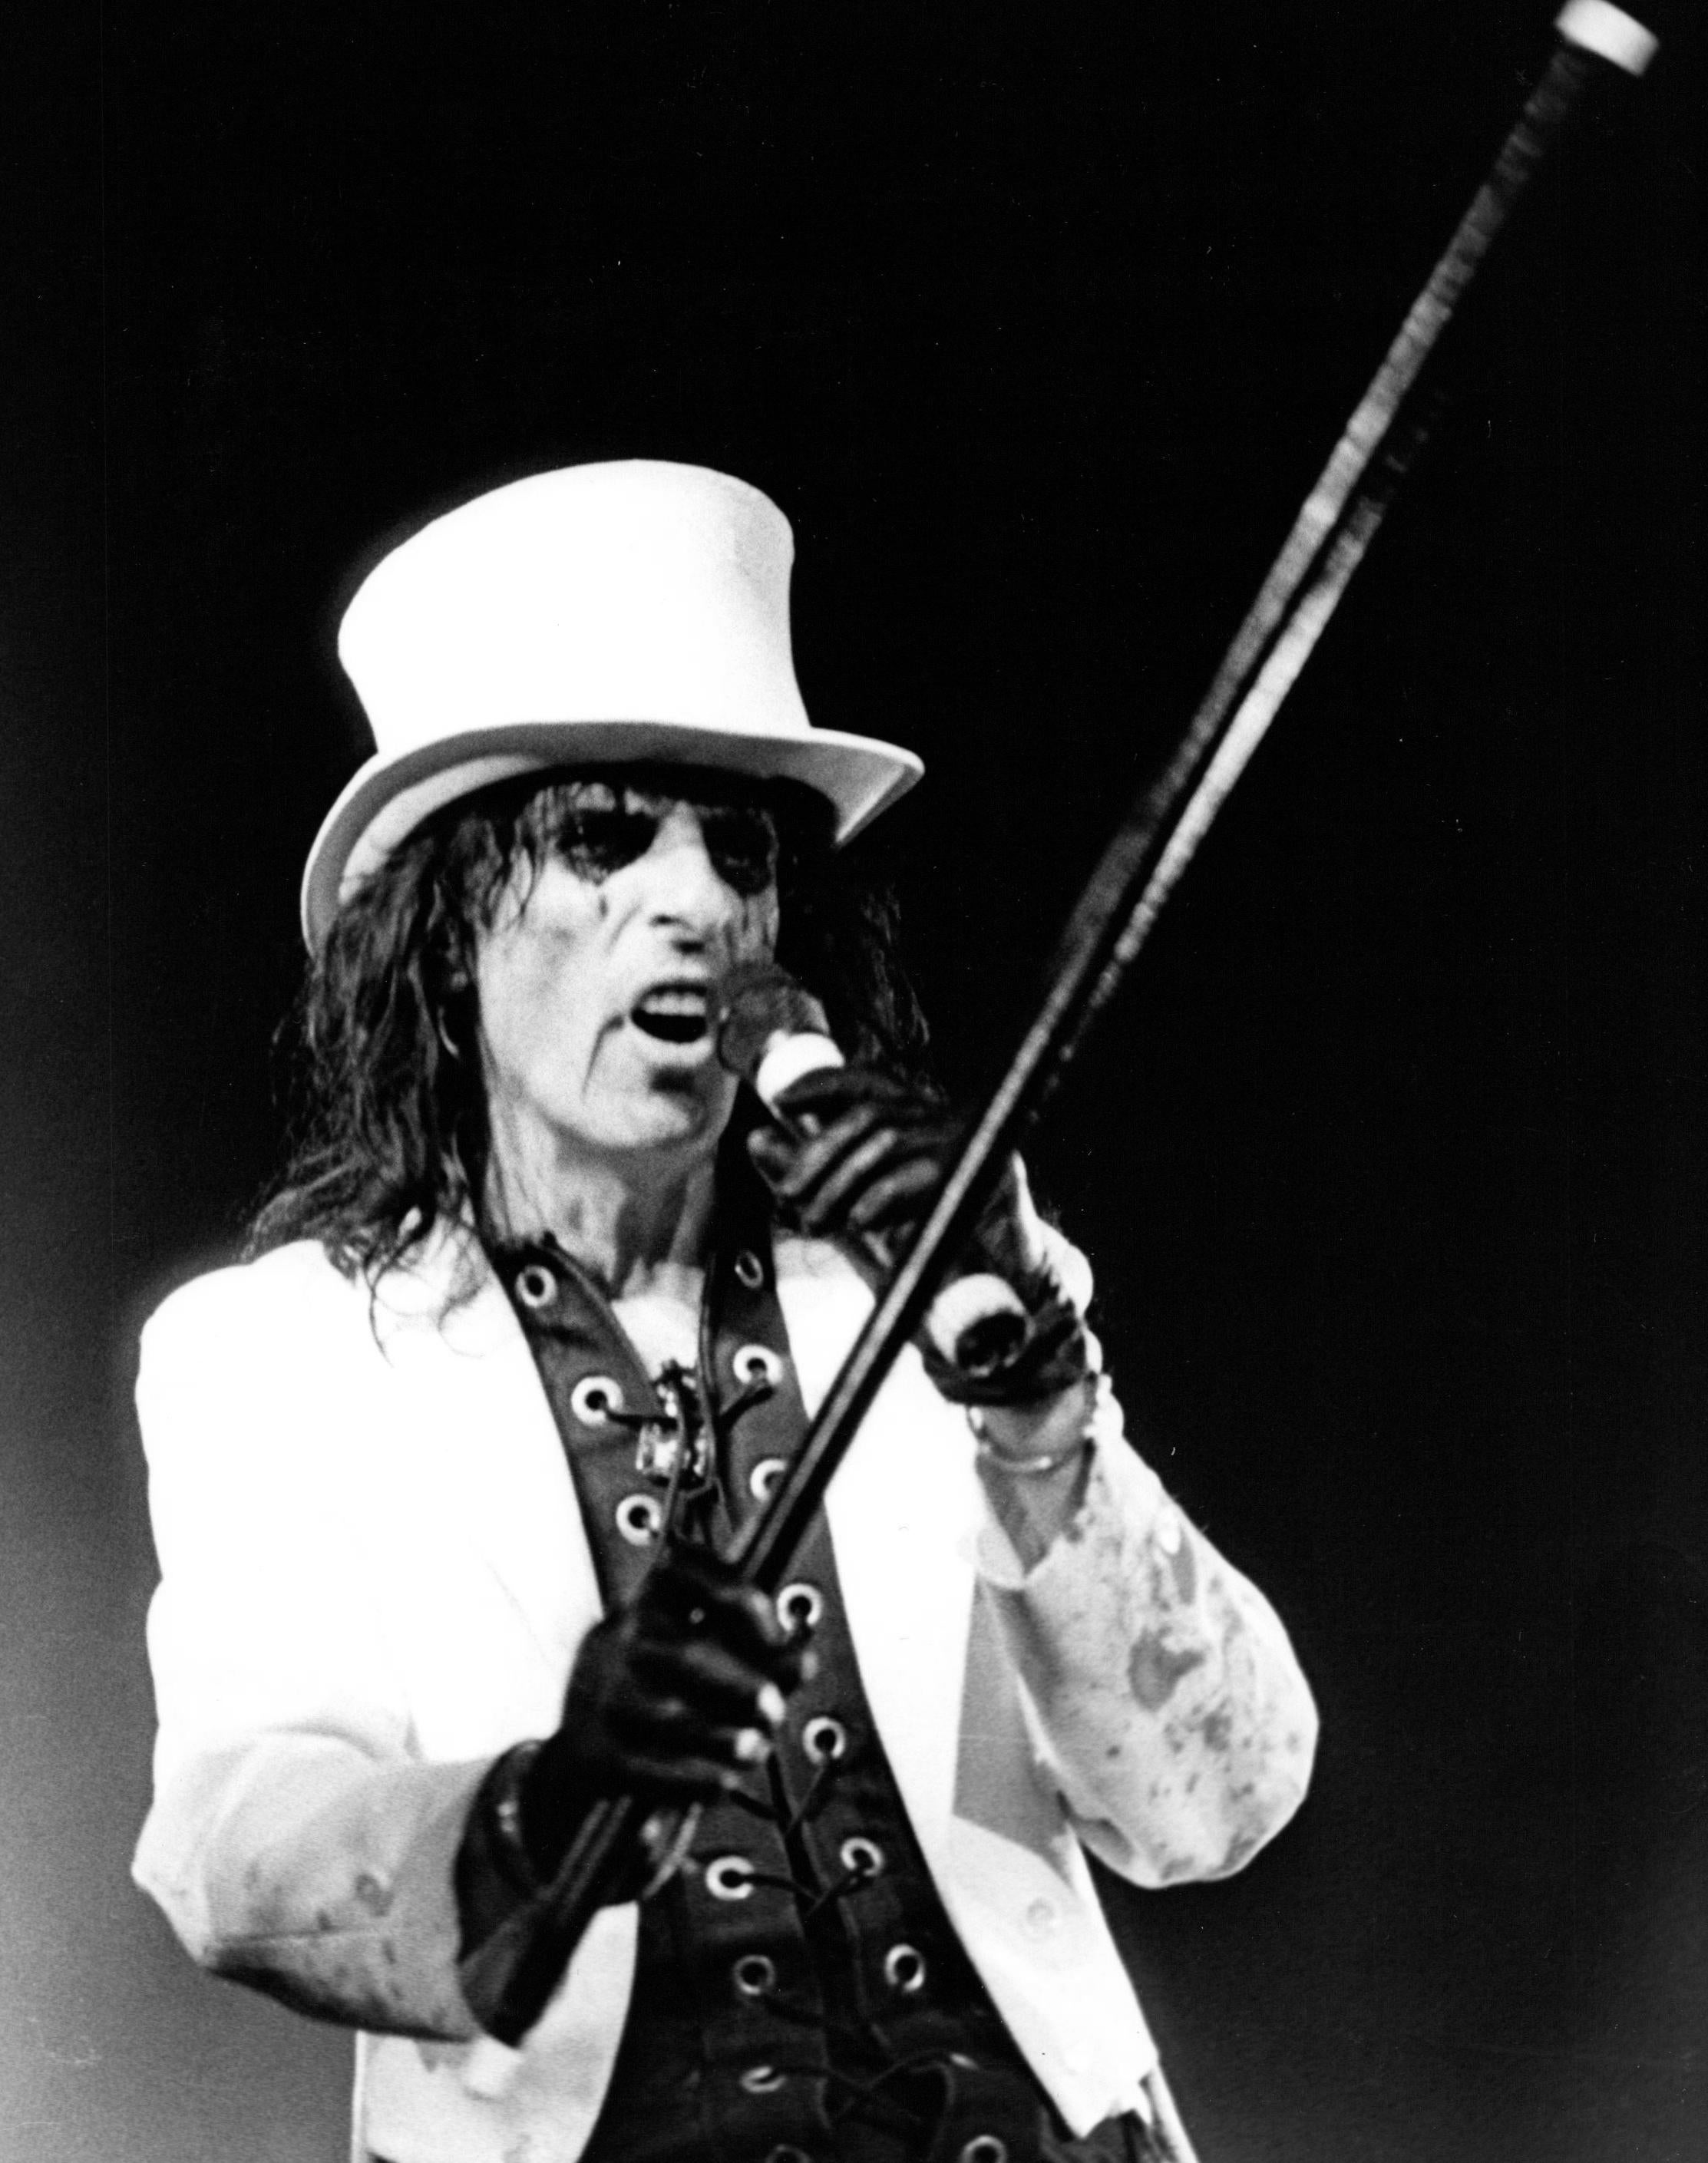 Christopher Helton Portrait Photograph - Alice Cooper Performing with Cane and Tophat Vintage Original Photograph